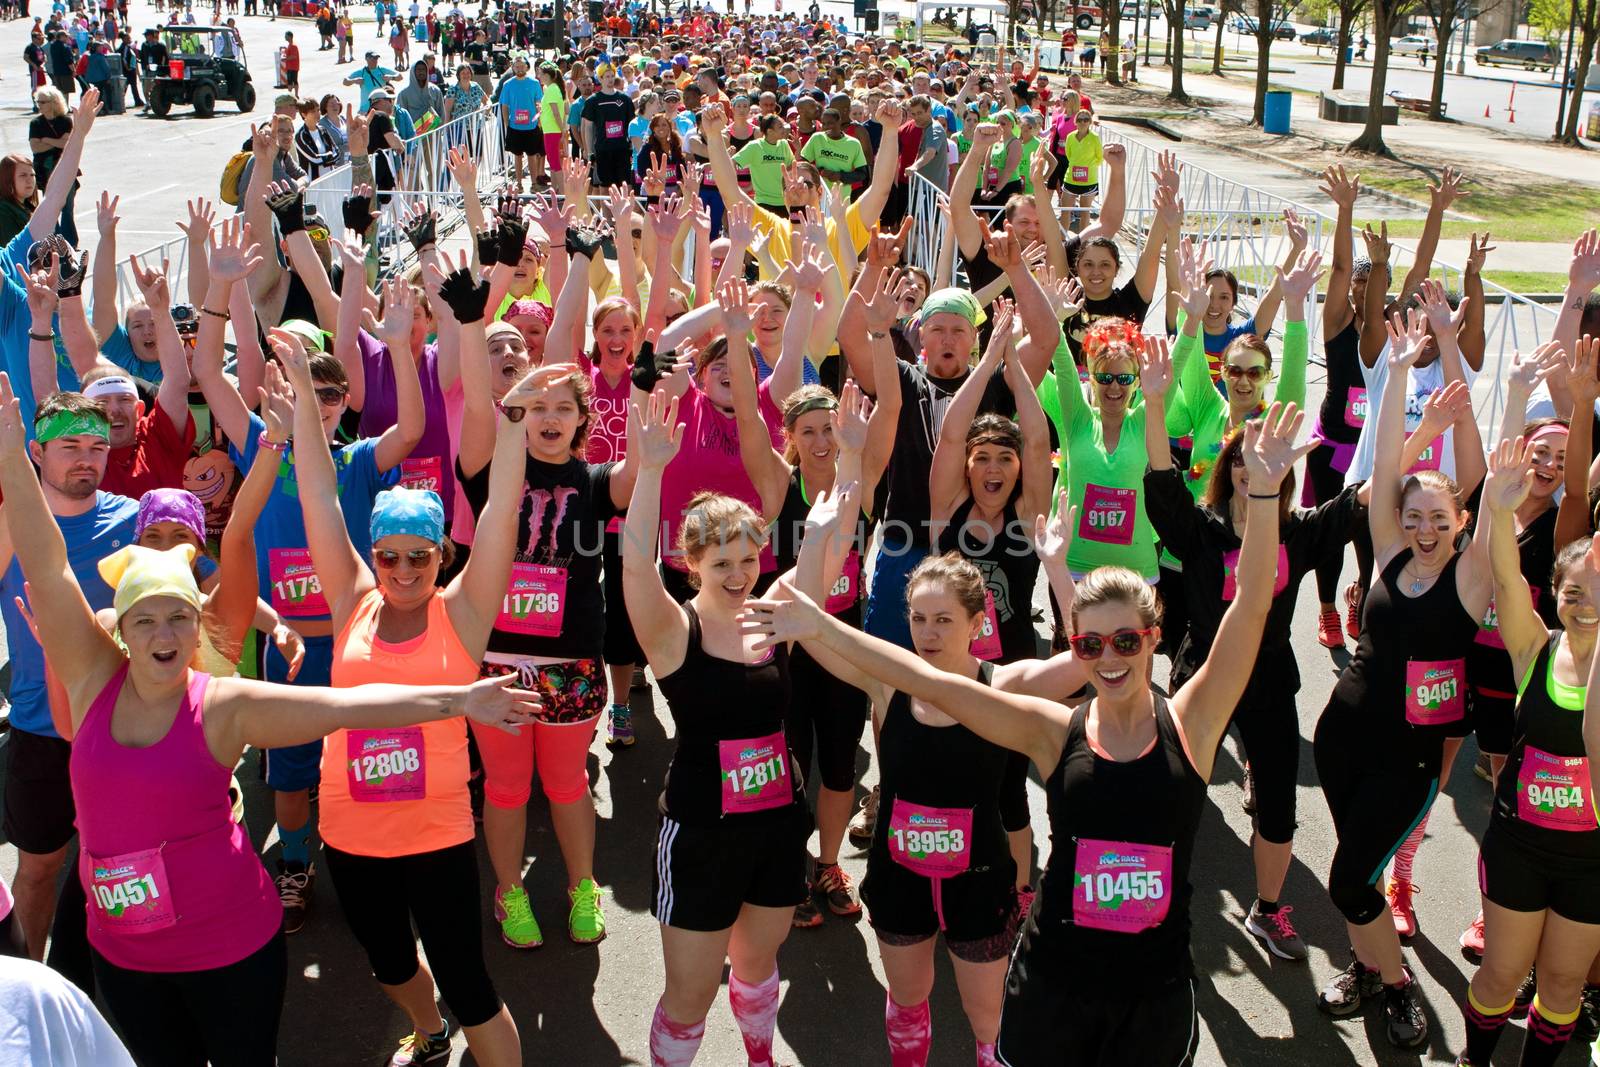 Atlanta, GA, USA - April 5, 2014:  A throng of excited runners gathered at start line, jubilantly waves to camera at the Ridiculous Obstacle Challenge (ROC) 5k race.